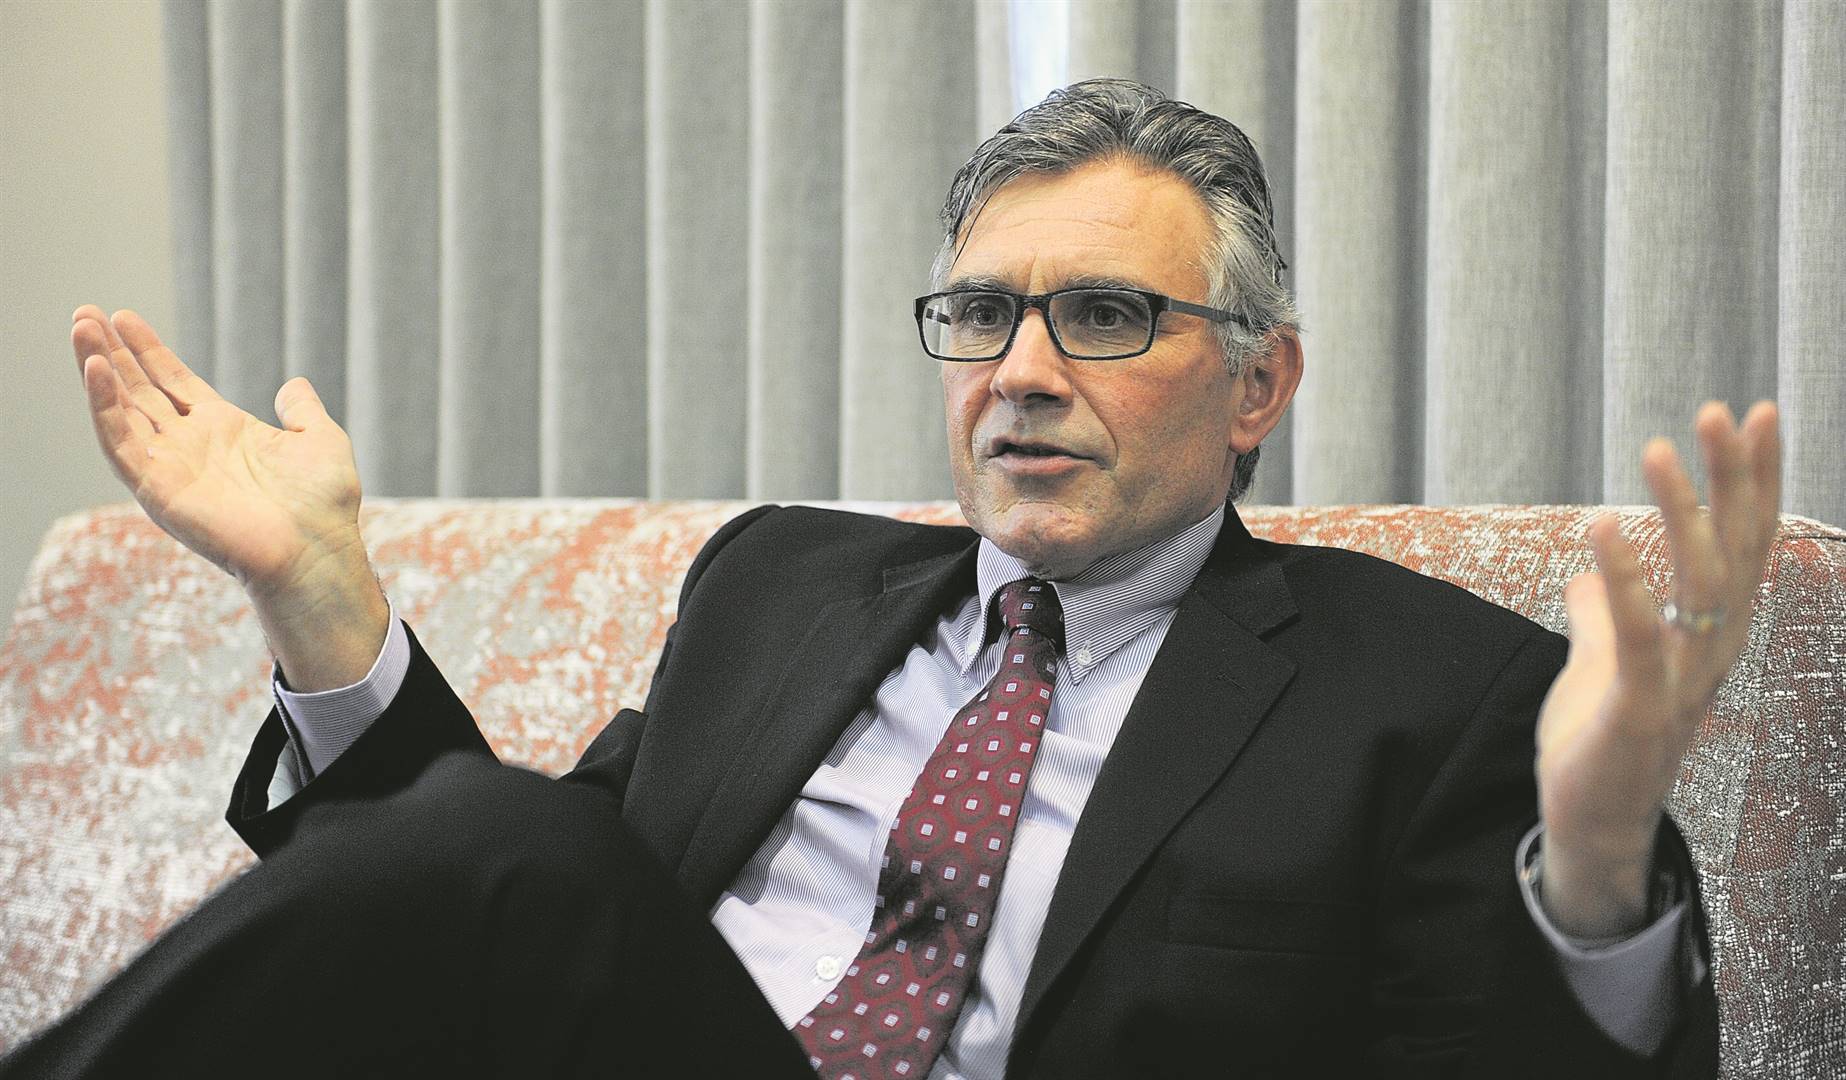 Stellenbosch University rector and vice-chancellor Wim de Villiers maintained, throughout the inquiry into nepotism allegations against him, that he acted in good faith. File image.  